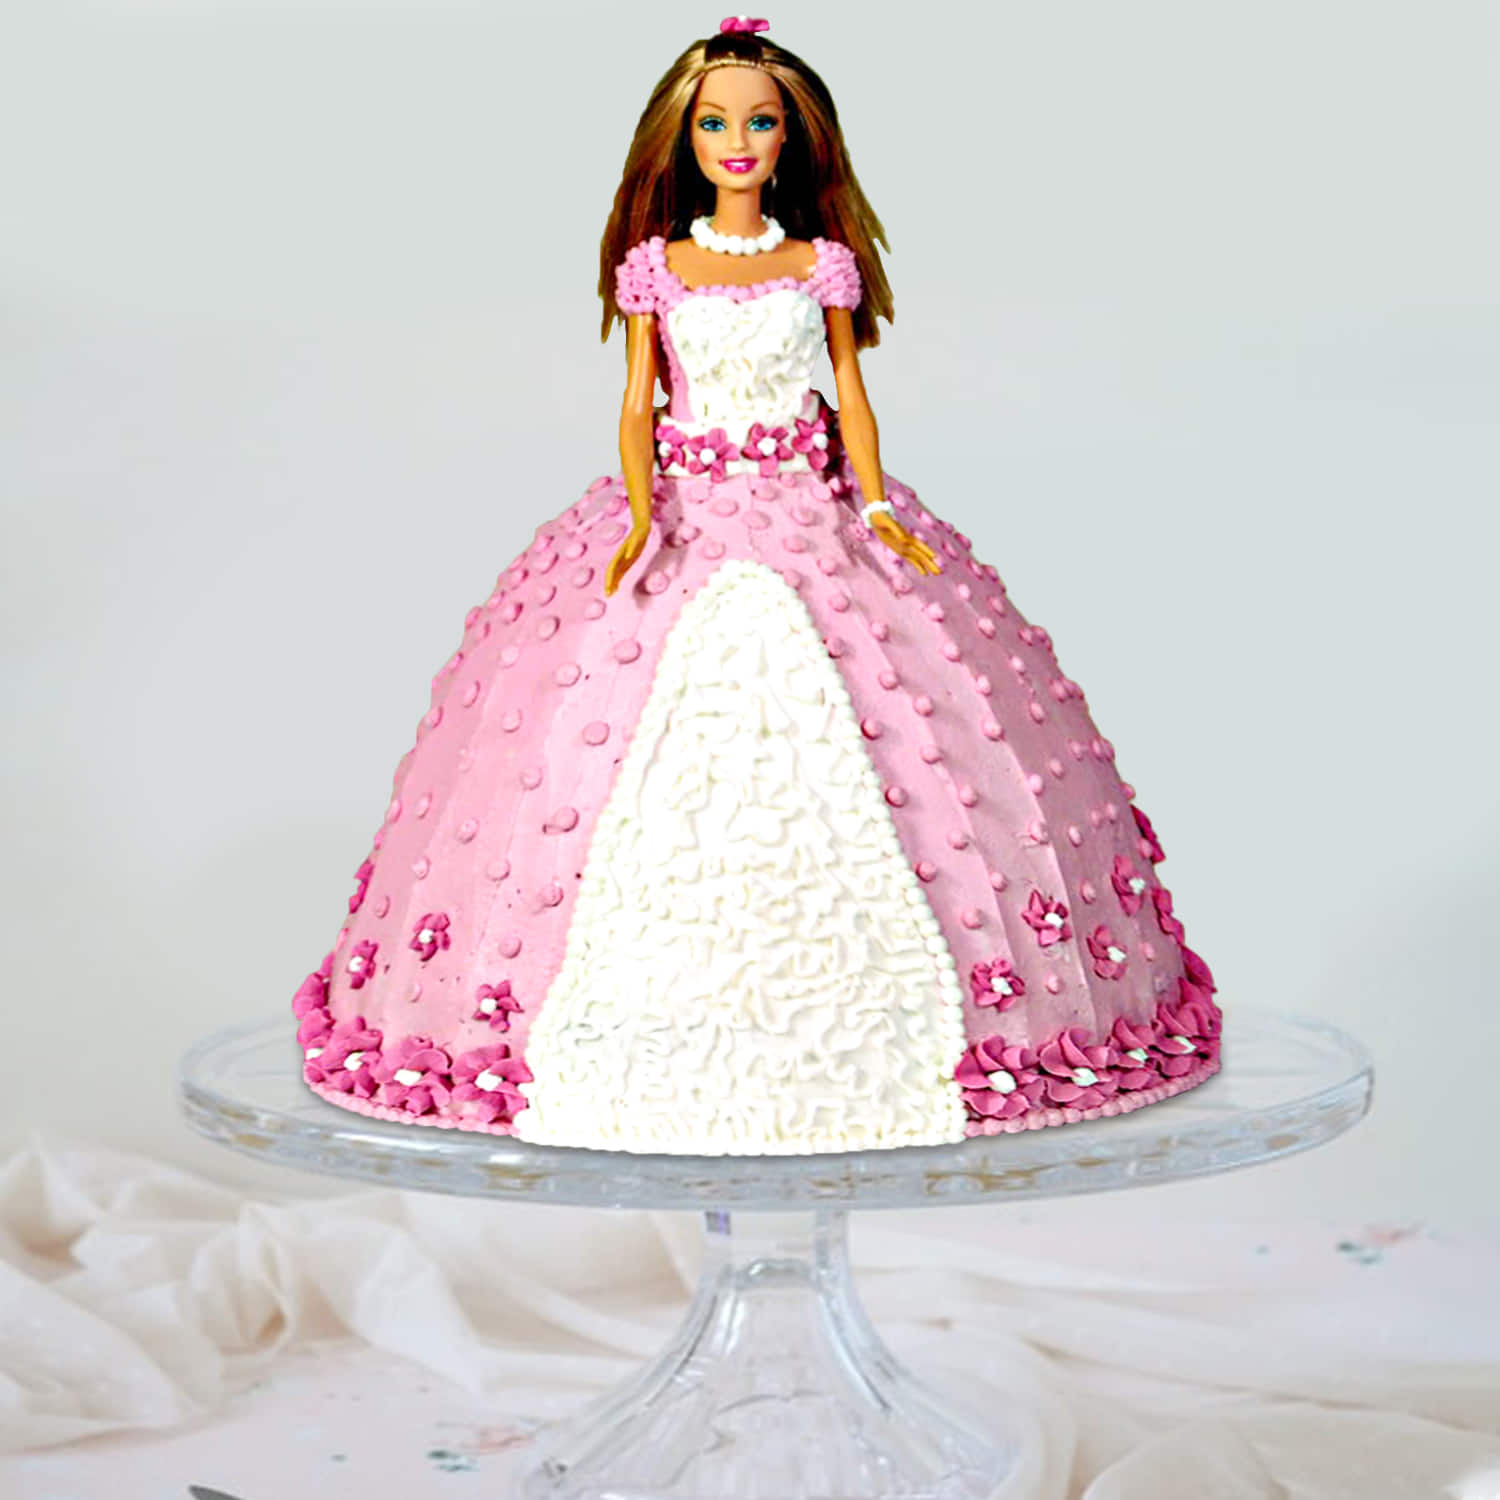 Barbie Cake - Buy Online, Free Next Day UK Delivery — New Cakes